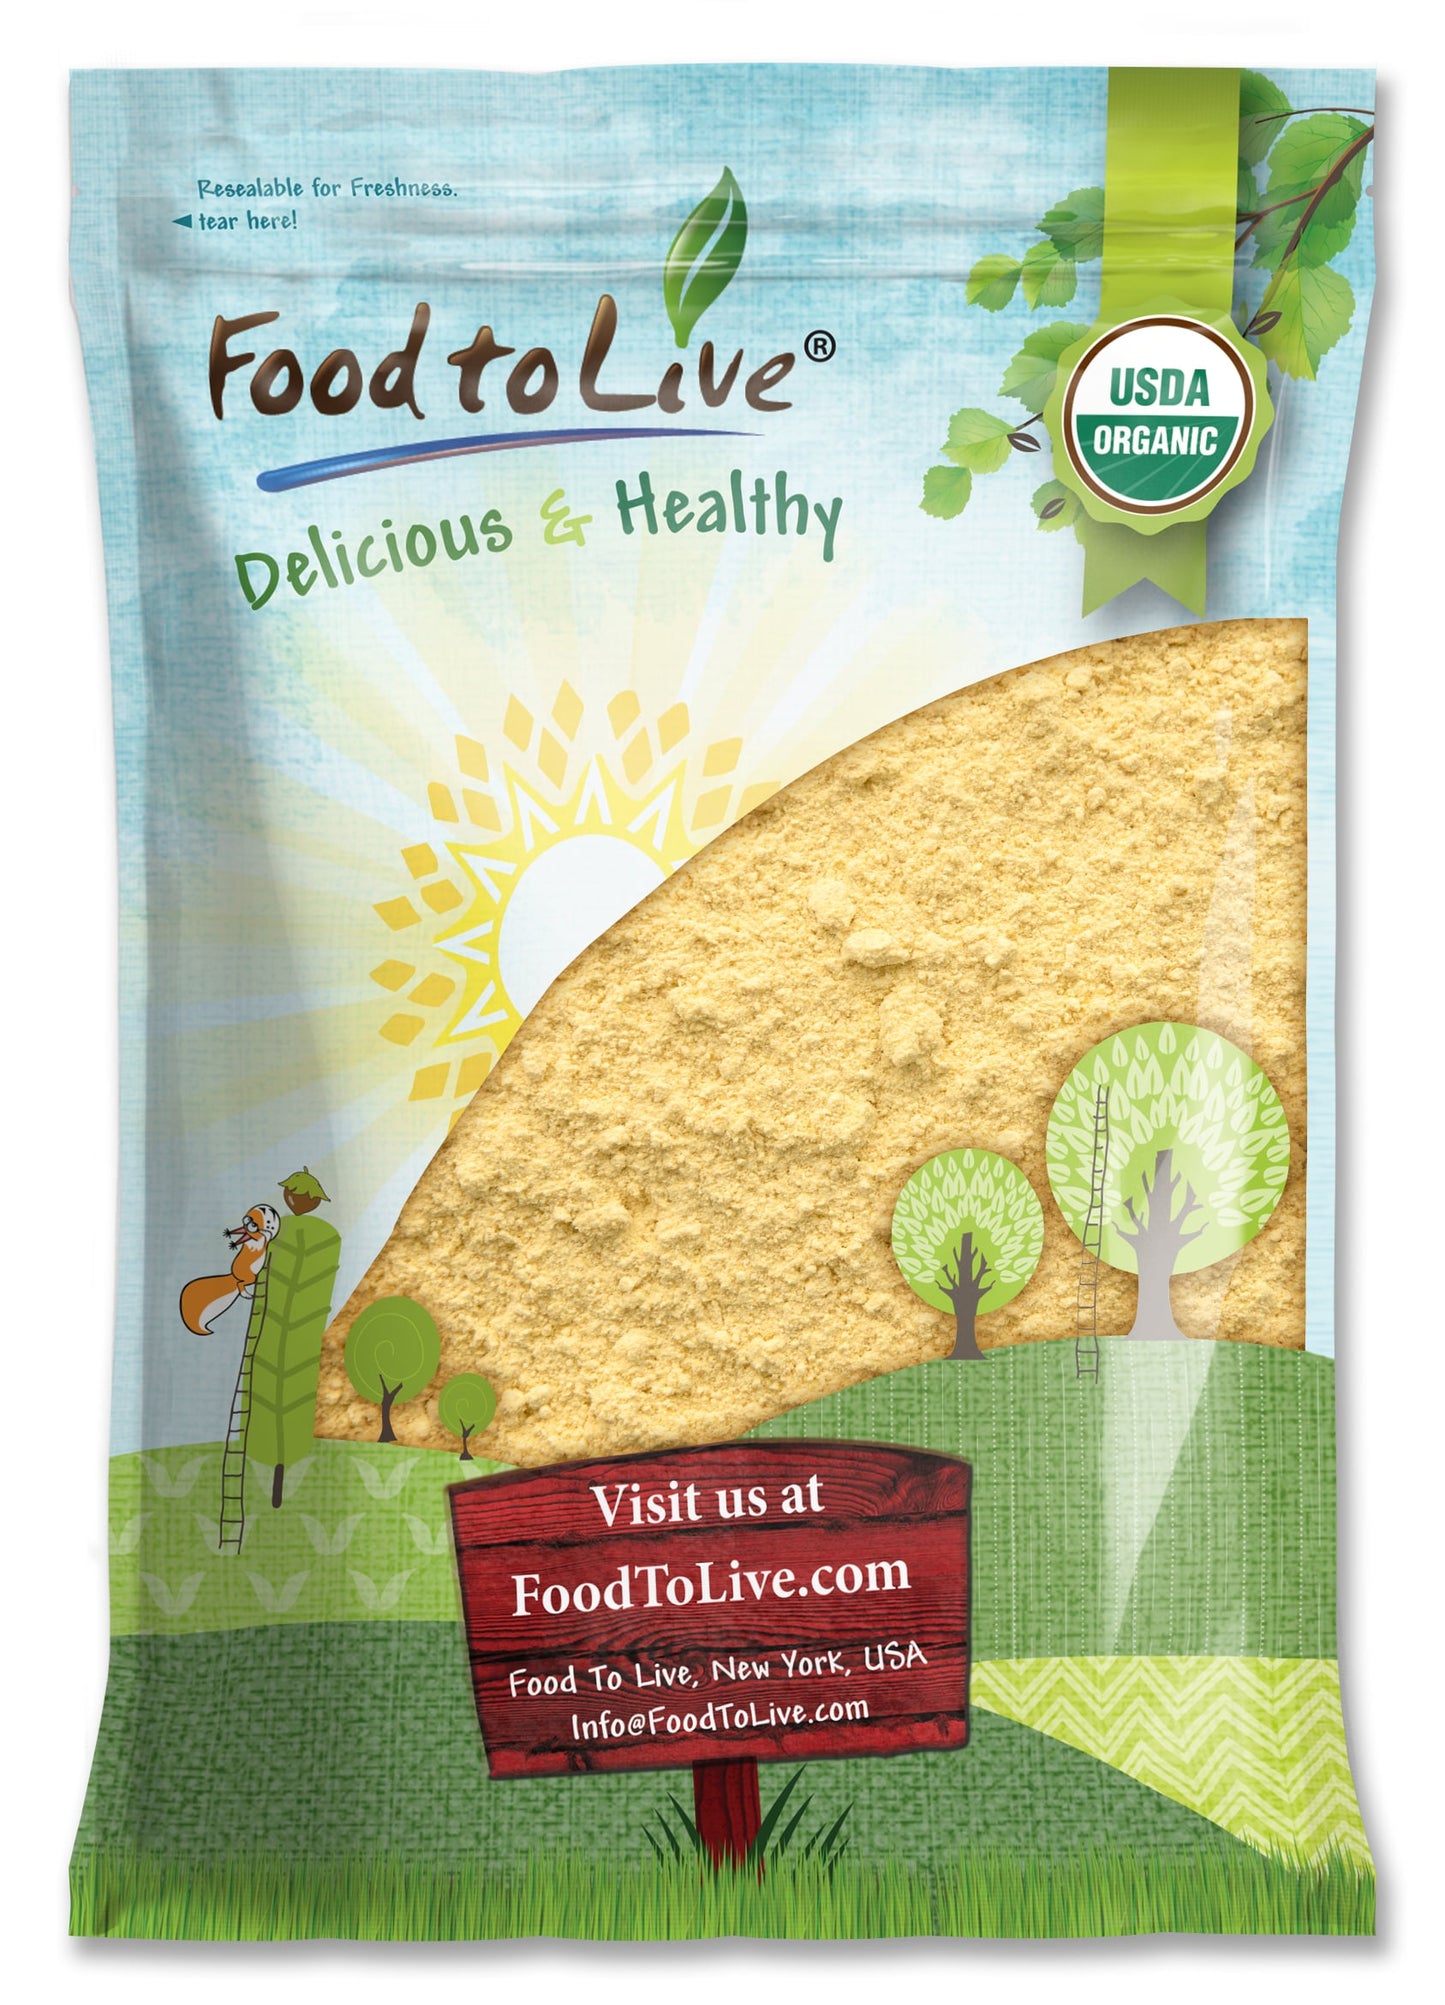 Gluten Free Organic Chickpea Flour – Non-GMO, Finely Milled Dried Garbanzo Beans, Vegan, Kosher, Bulk. High in Folate, Dietary Fiber, Protein. Perfect for Baking, Made in USA